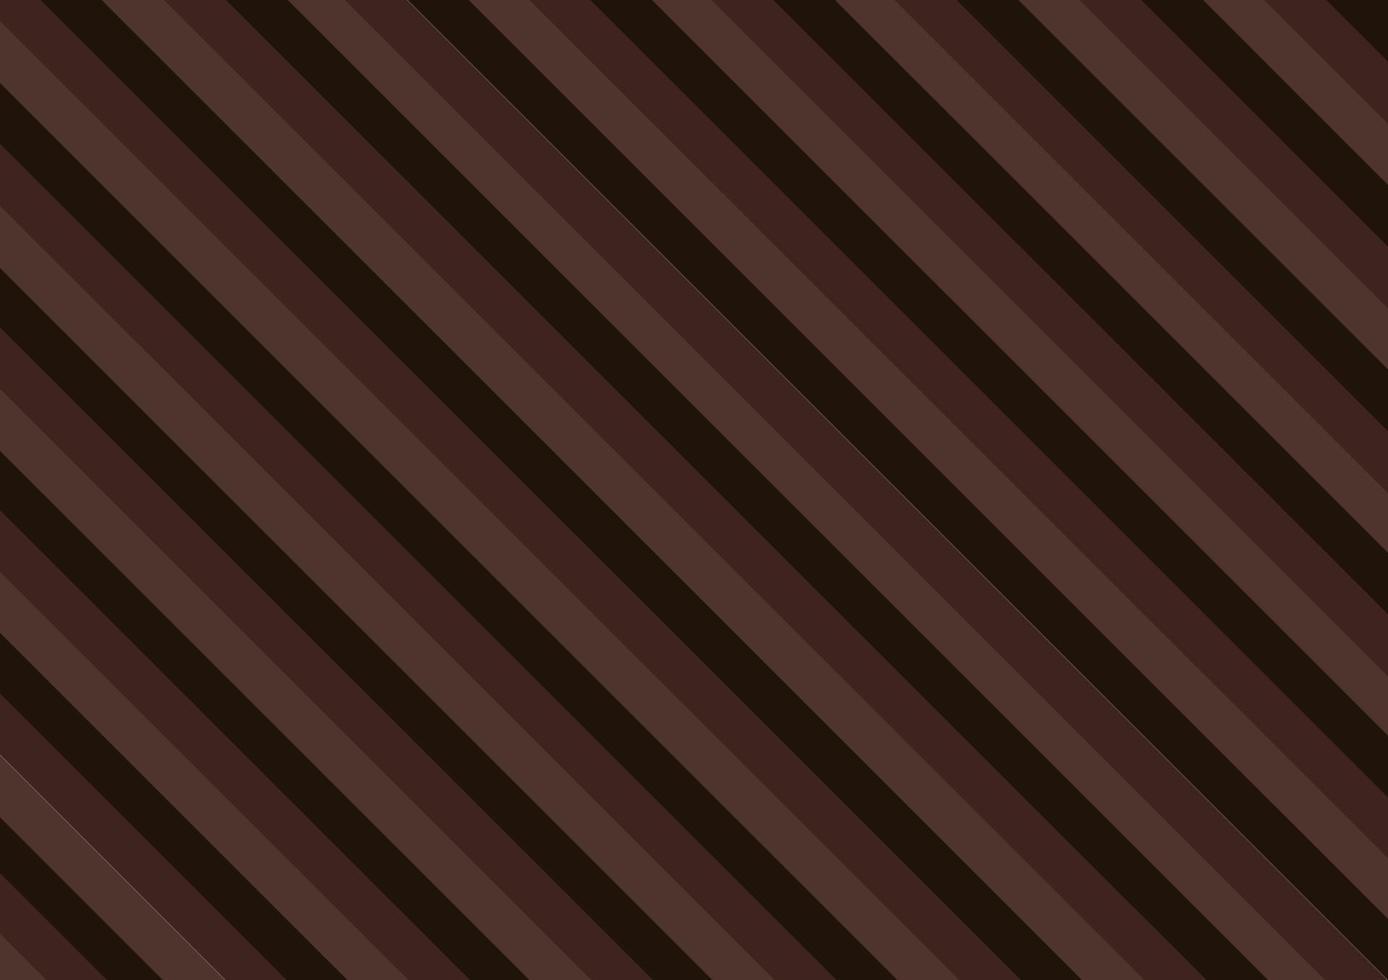 Abstract background with a brown theme vector